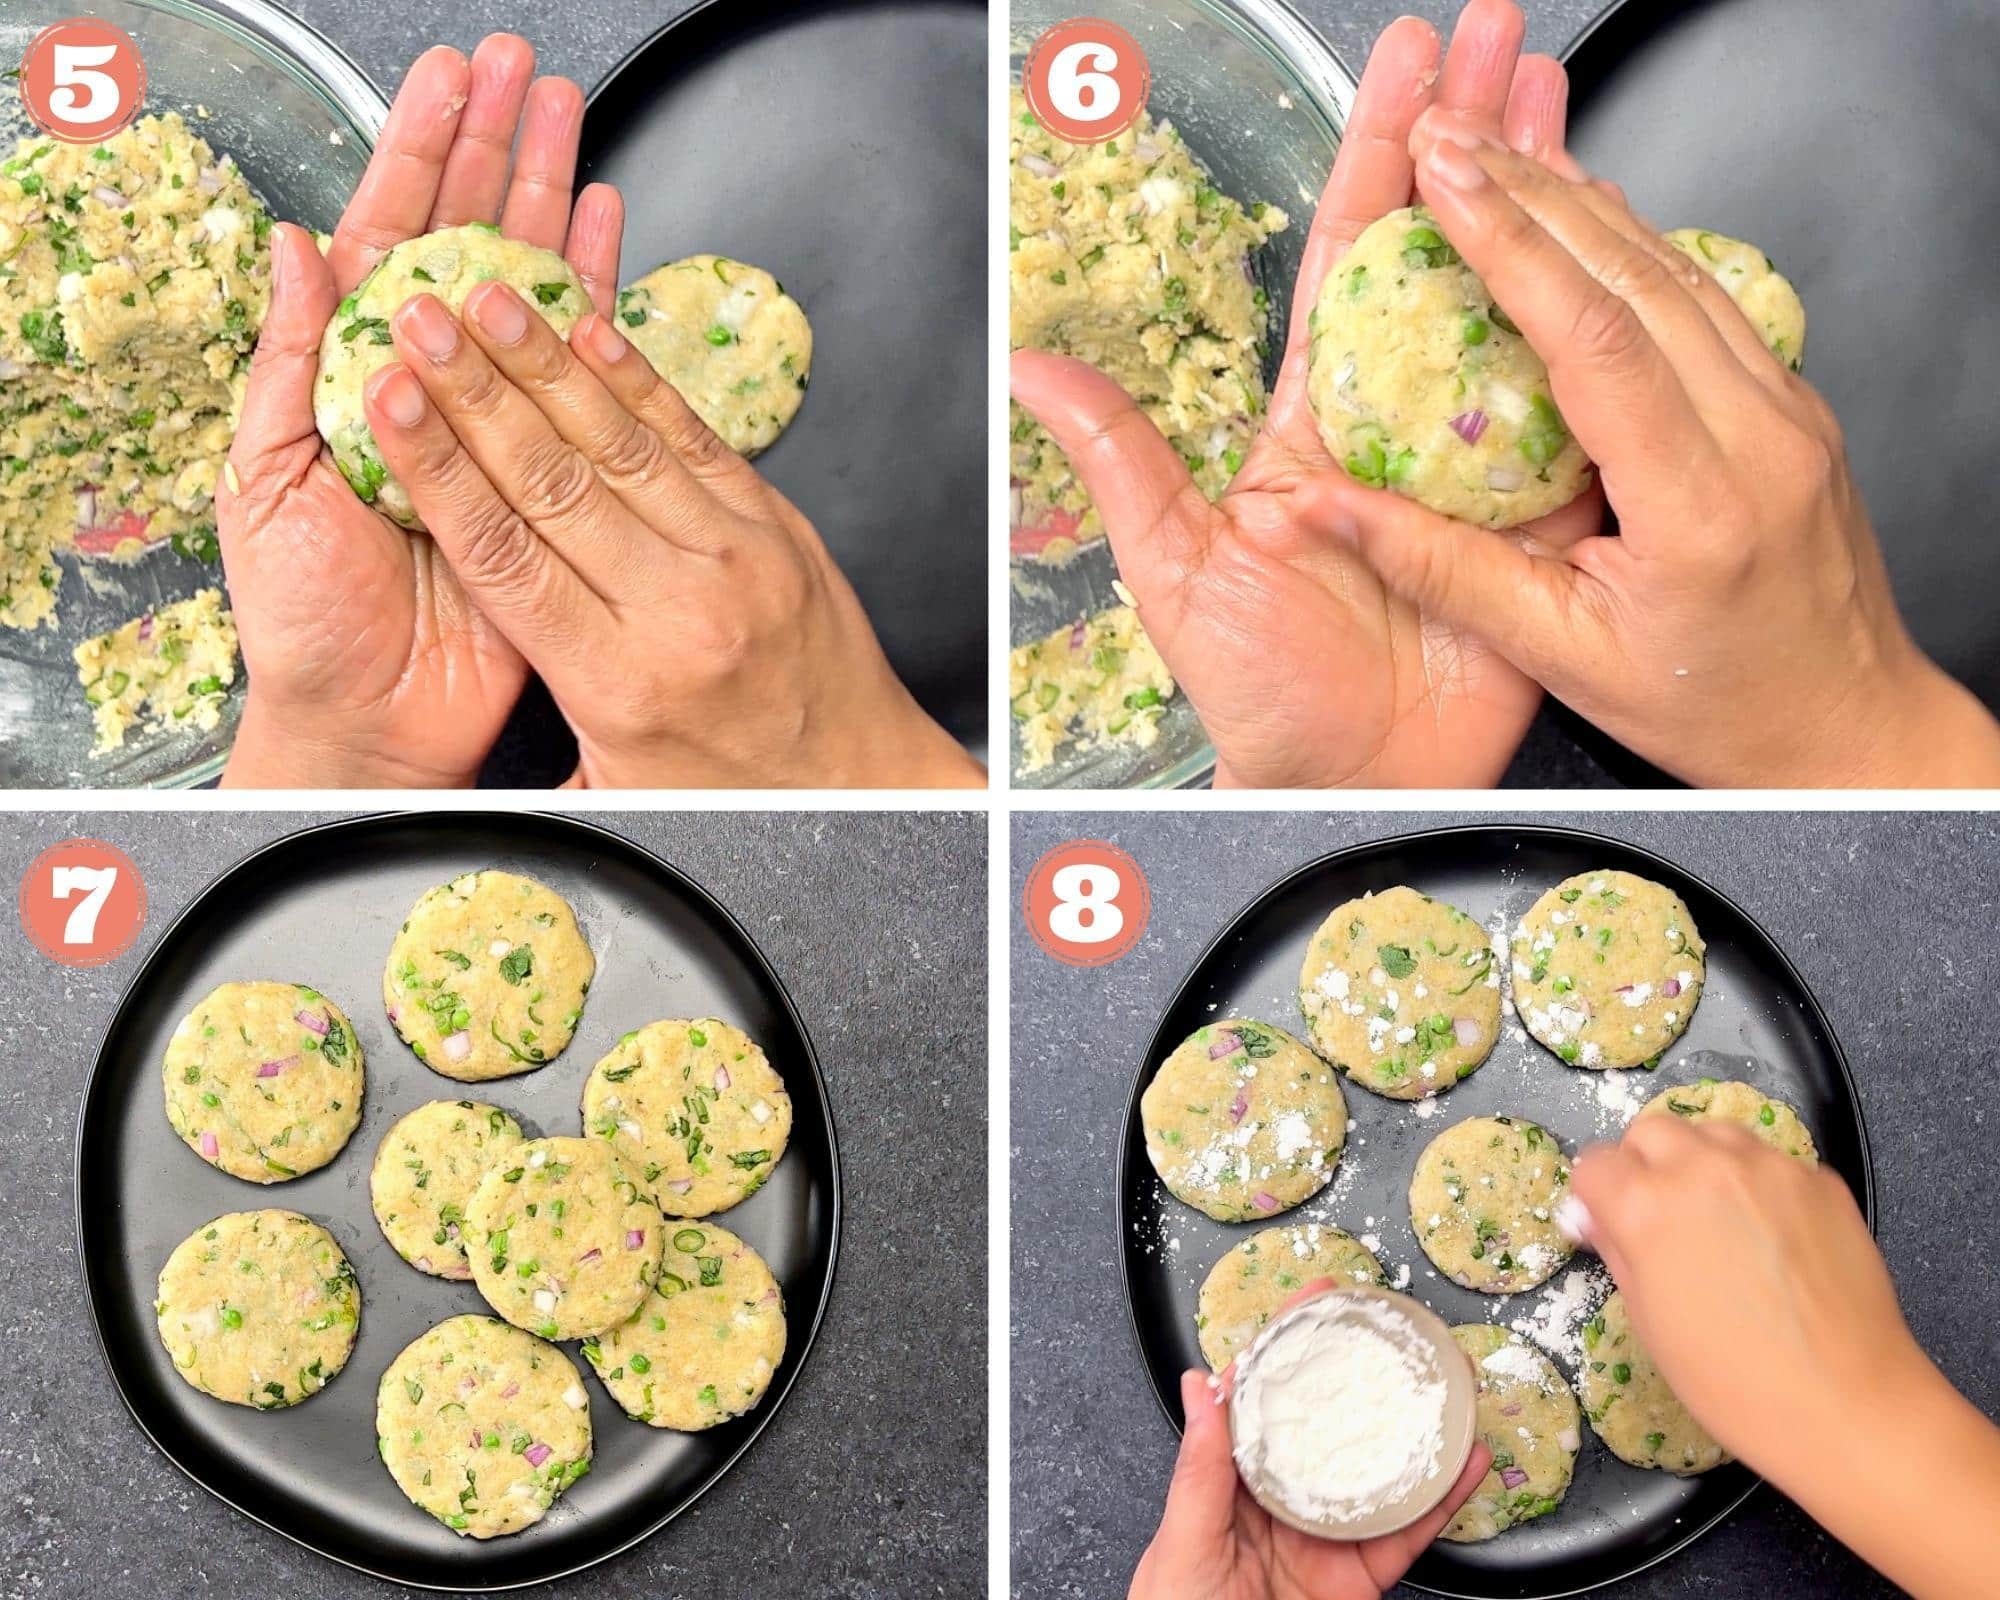 steps 5-8 of aloo tikki being formed into patties and coated with cornstarch